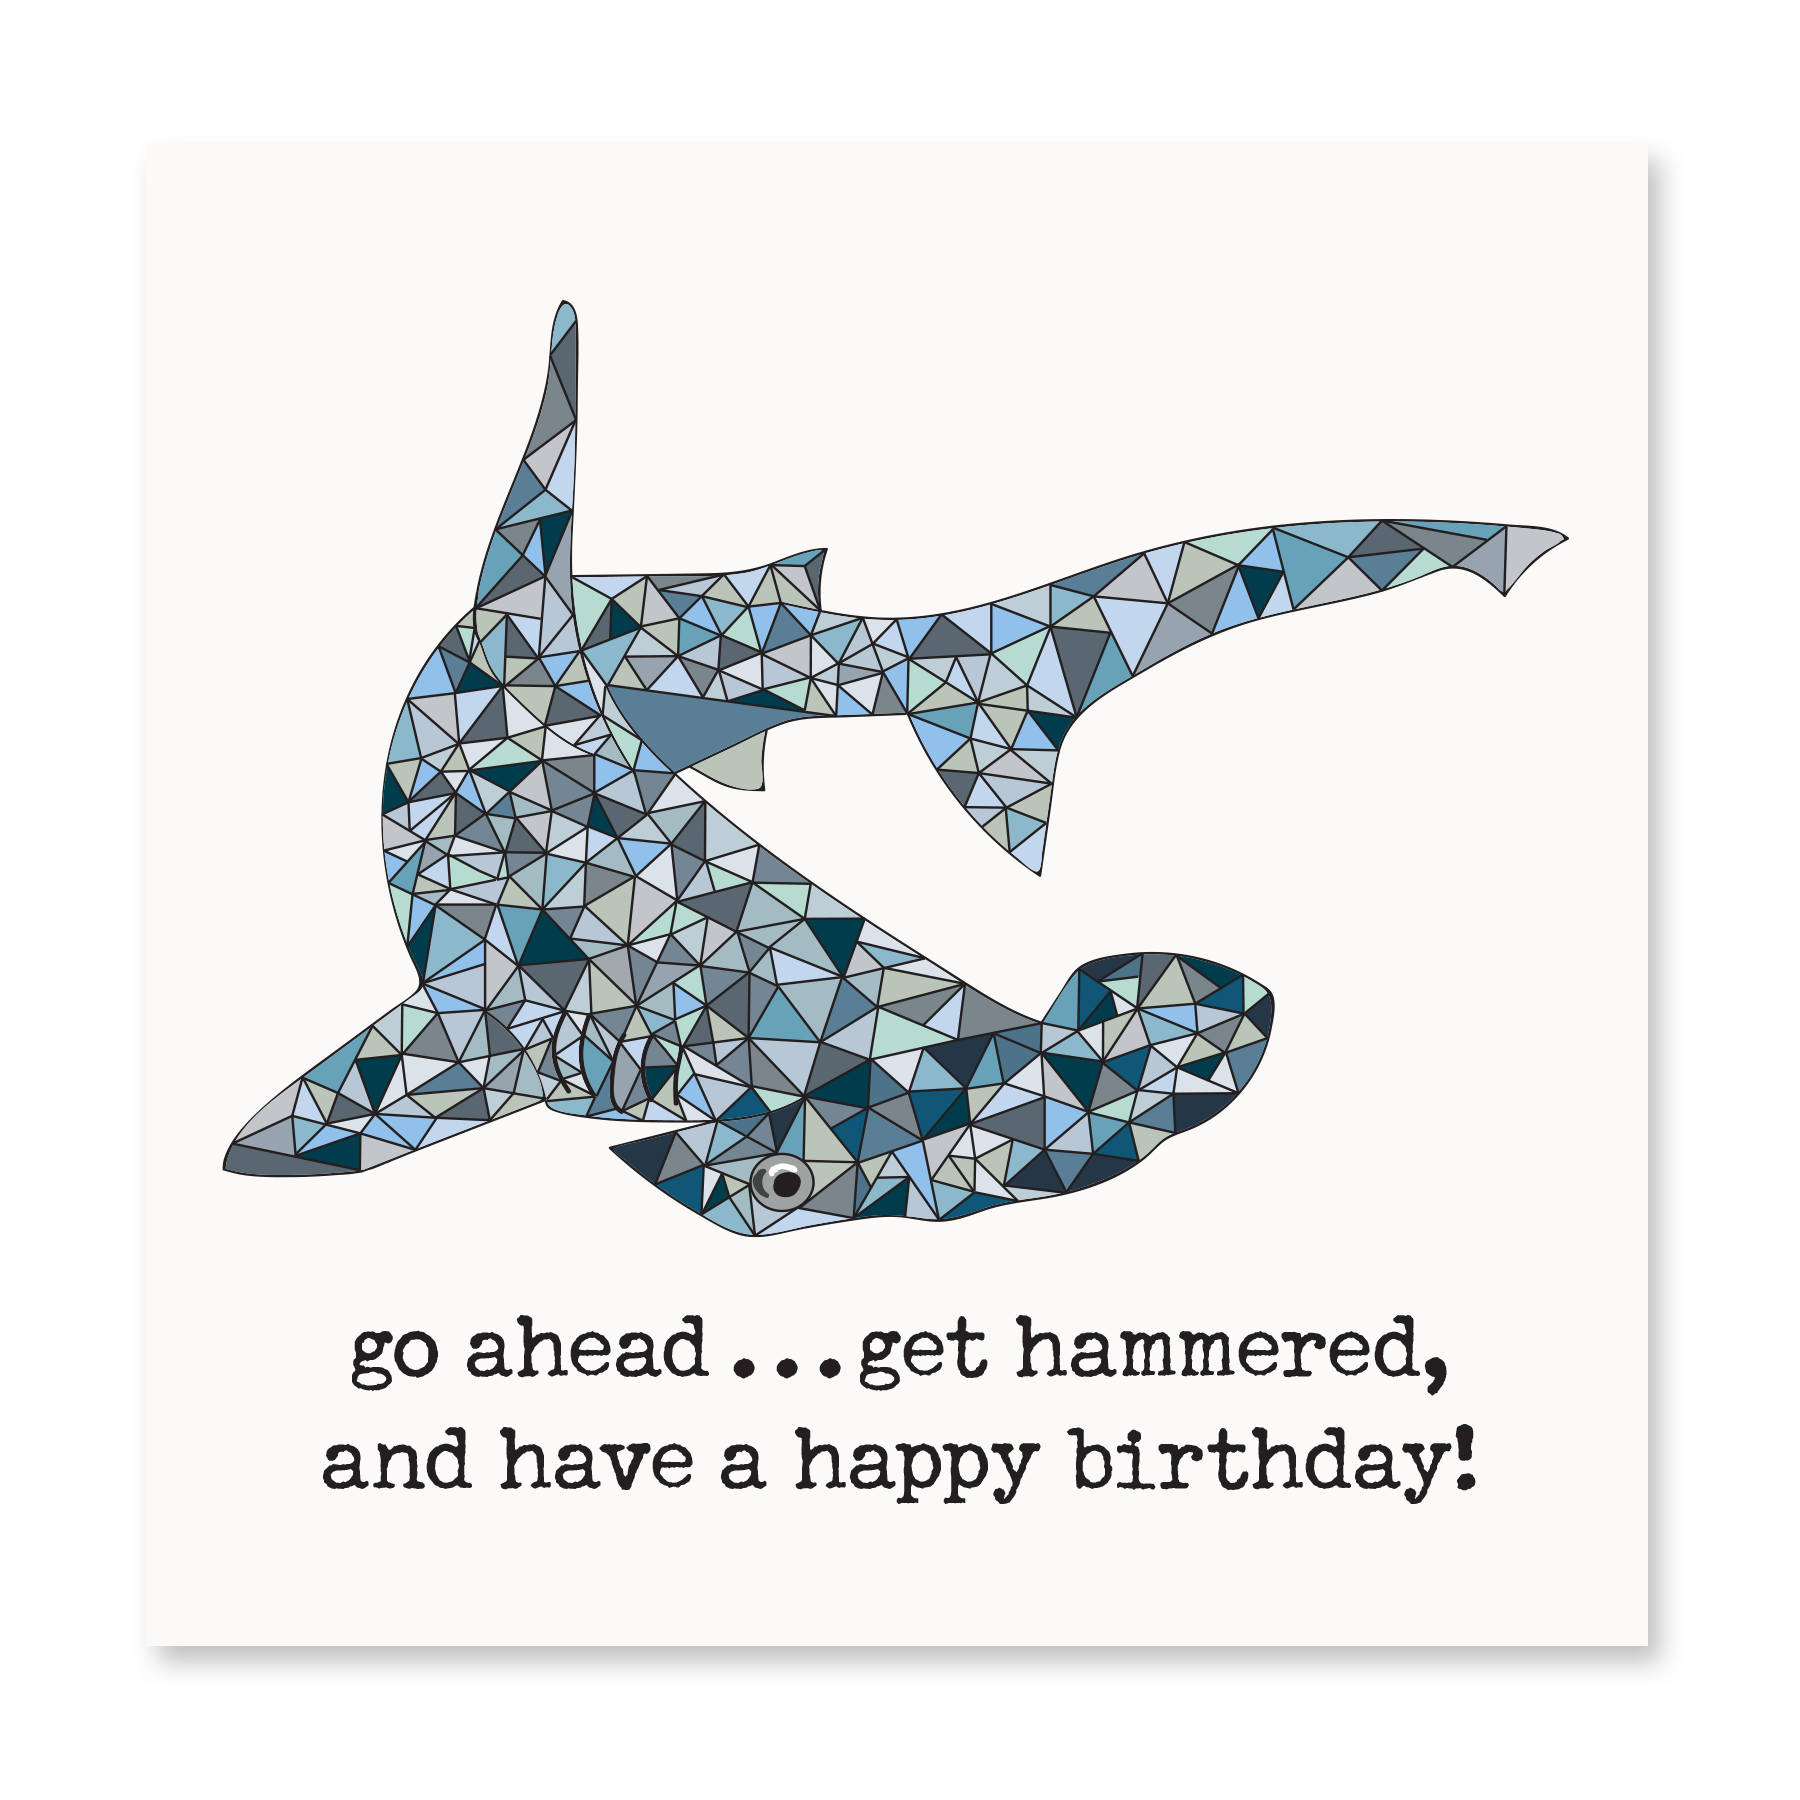 Hammerhead Shark Birthday Greeting Card  Blue Pelican Outer Banks Shopping  Cape Hatteras, NC